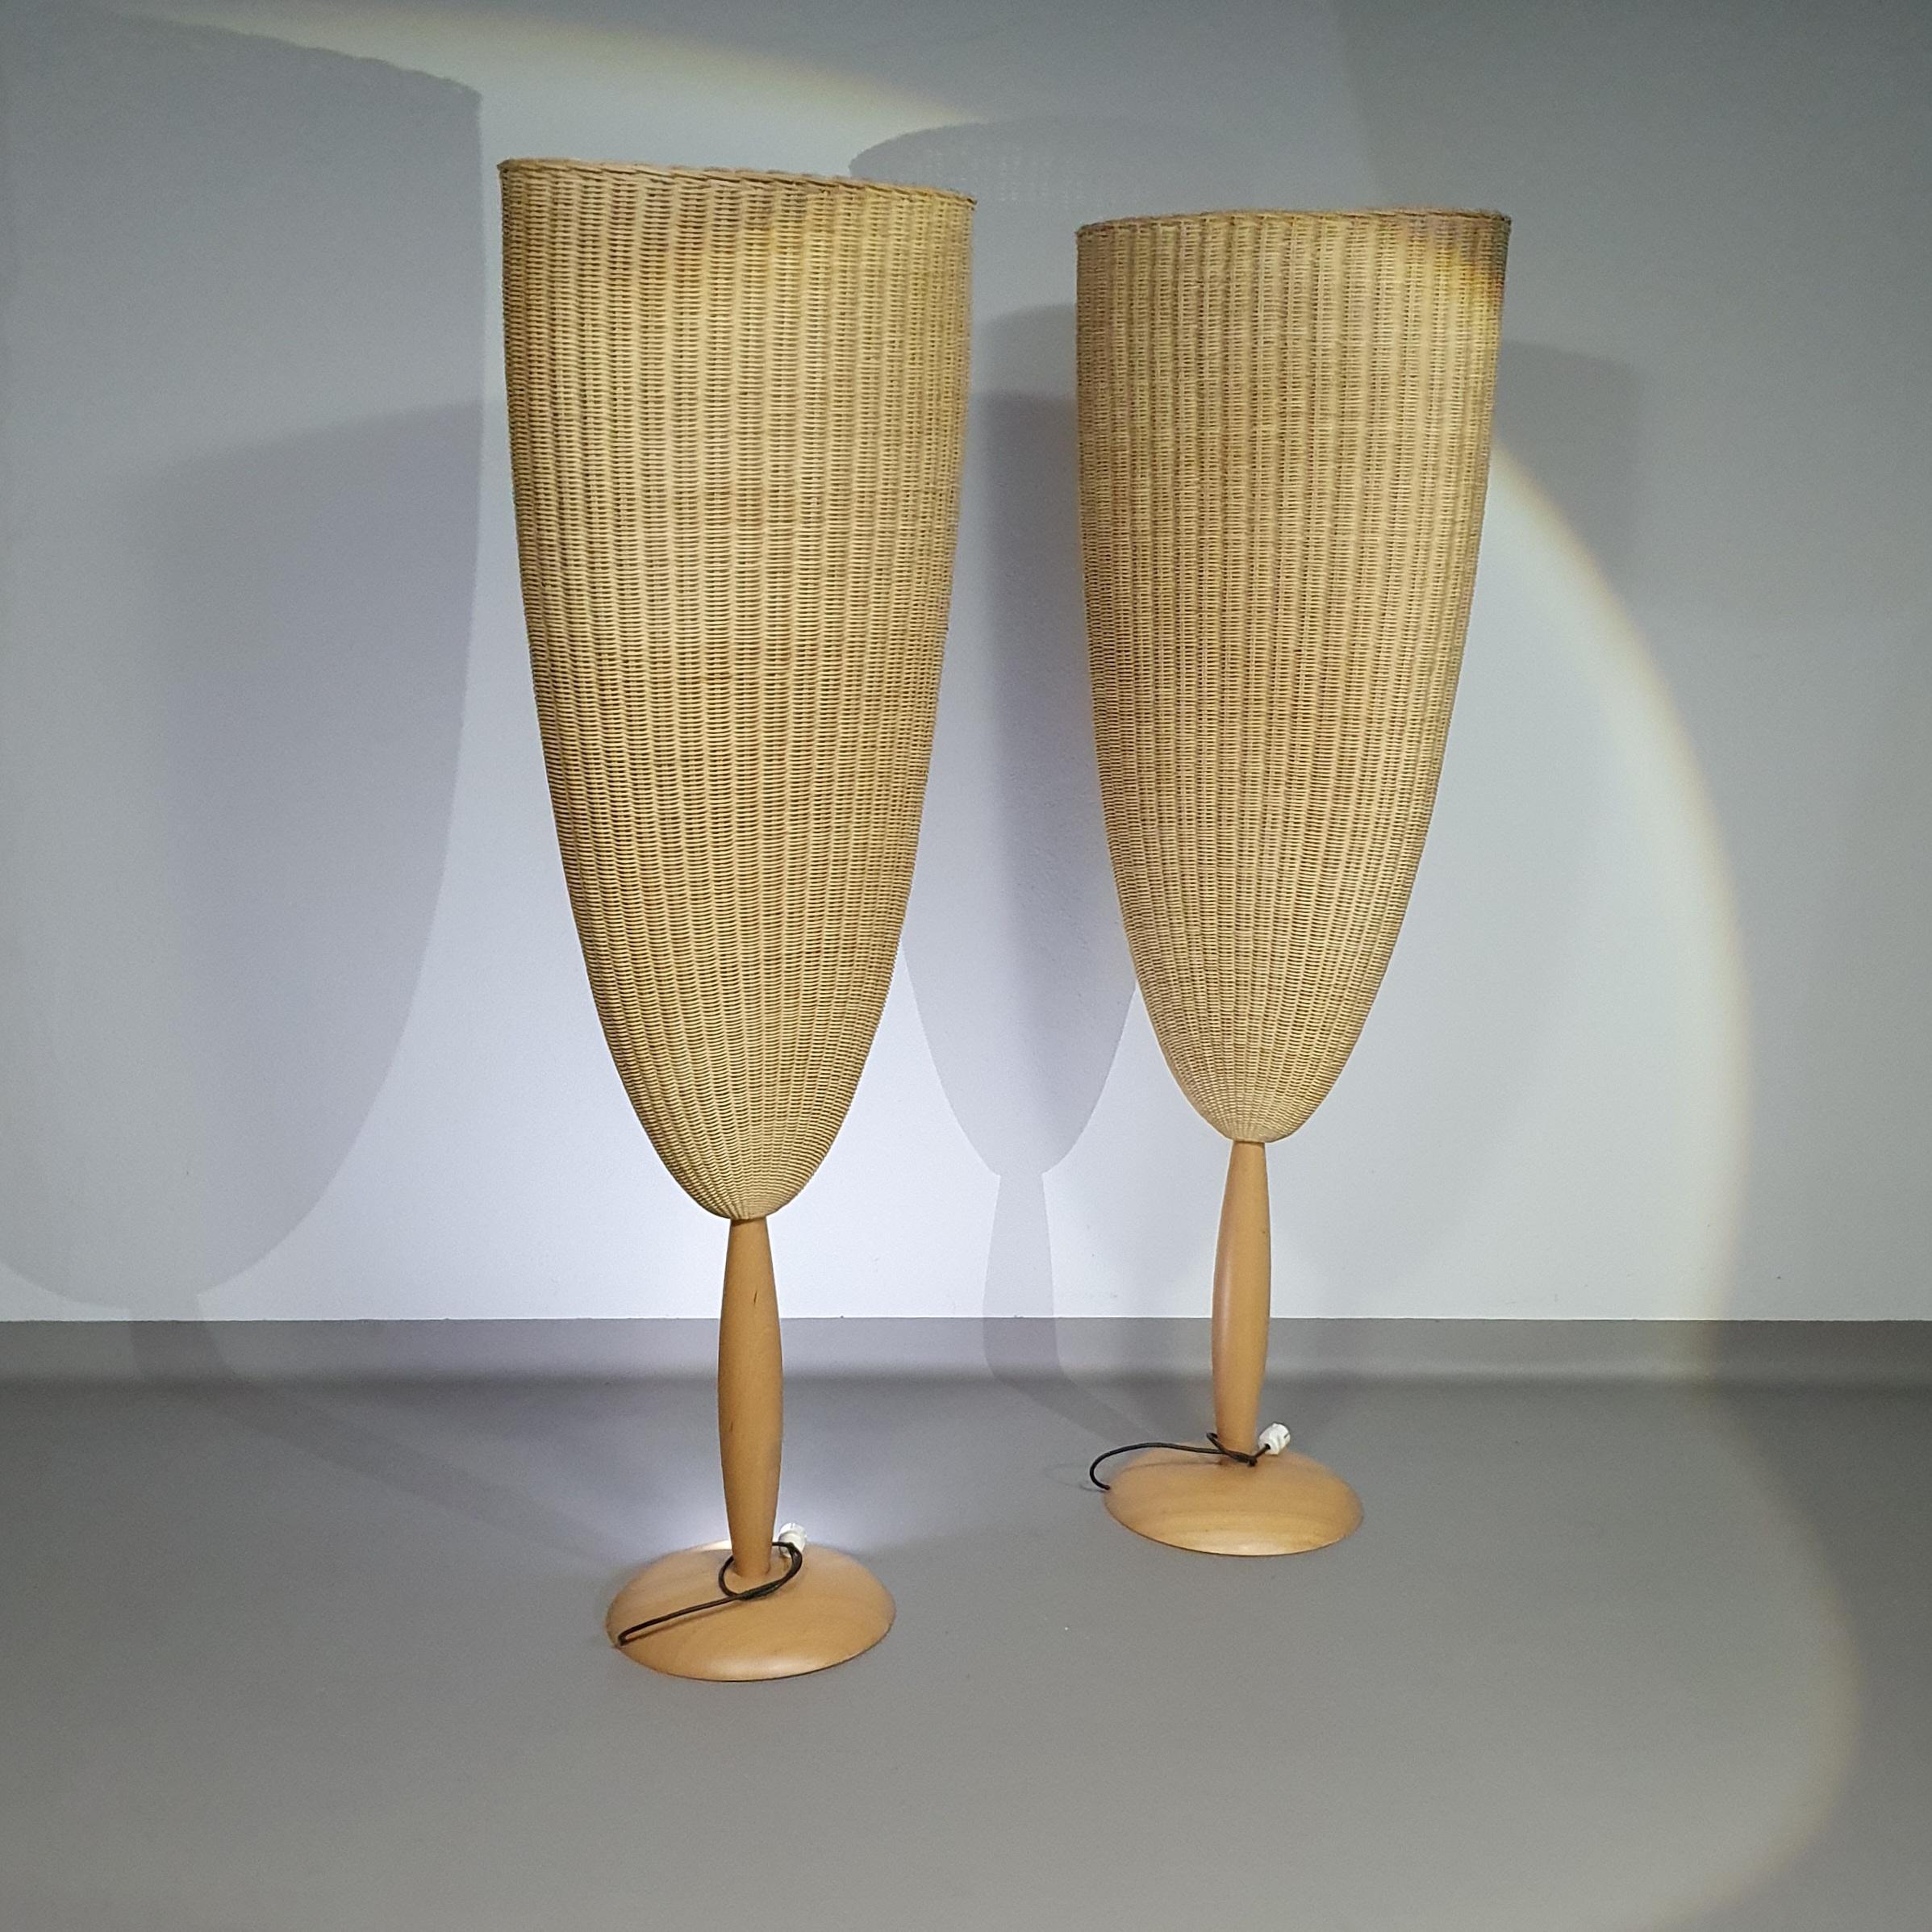 Organic modern Flûte floor lamps with large woven cane lamp shade that sits upon a beech wood base designed by Marco Agnoli for Pierantonio Bonacina, Italy 1991.
Marco Agnoli Flûte Woven Cane Floor Lamp for Pierantonio Bonacina, Italy